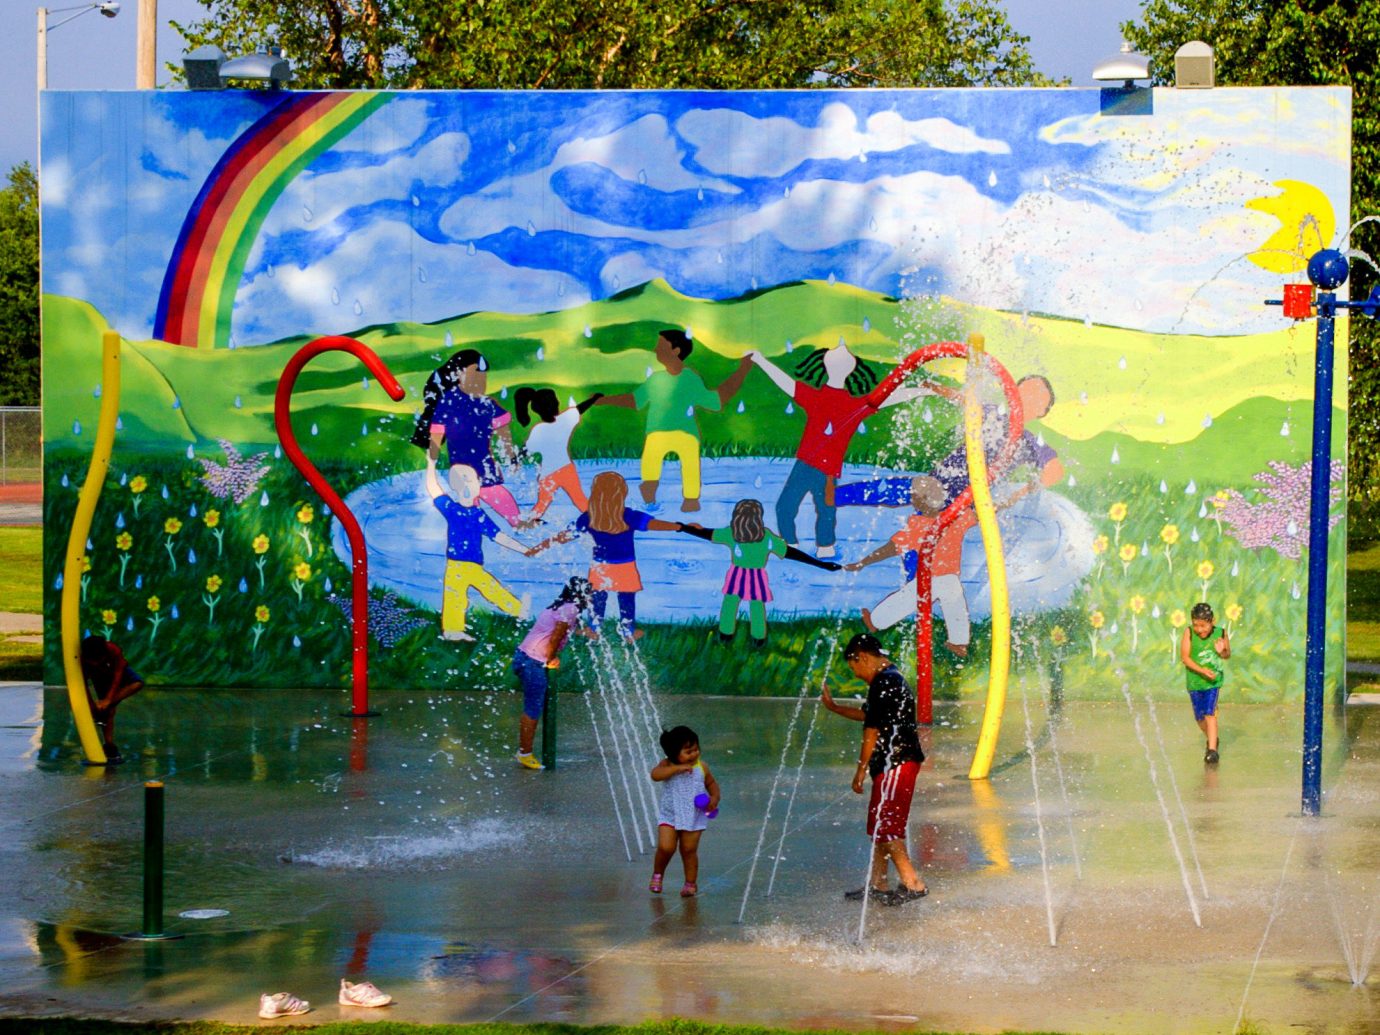 Offbeat water Nature art mural leisure amusement park painting tree colorful tourist attraction recreation fun artwork water feature graffiti colored visual arts tourism park plant Playground world